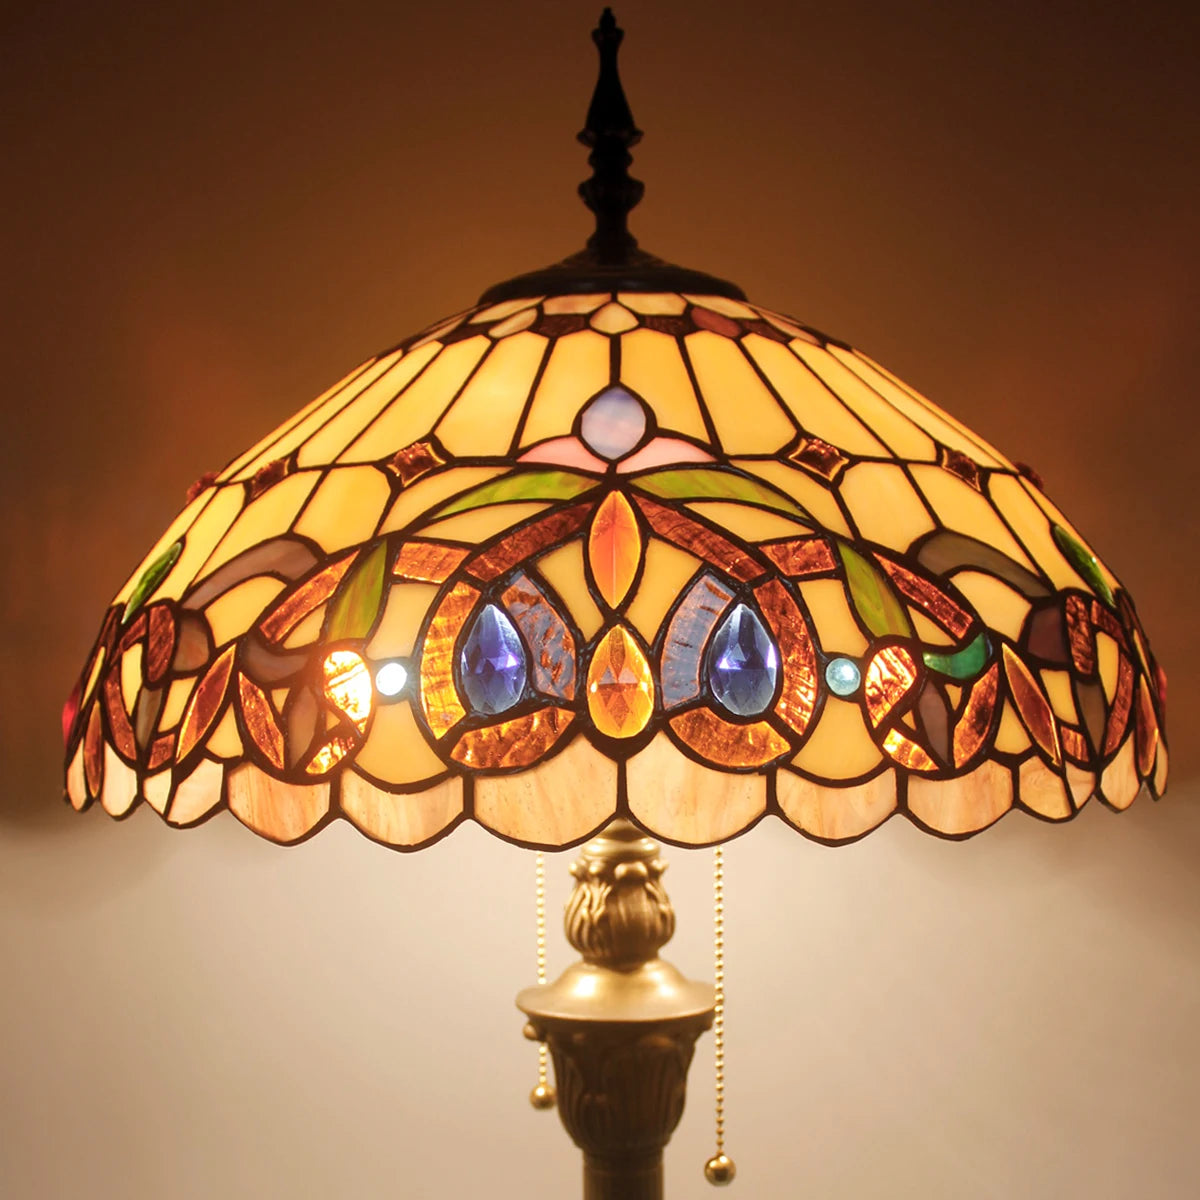 Tiffany Floor Lamp Serenity Victorian Stained Glass